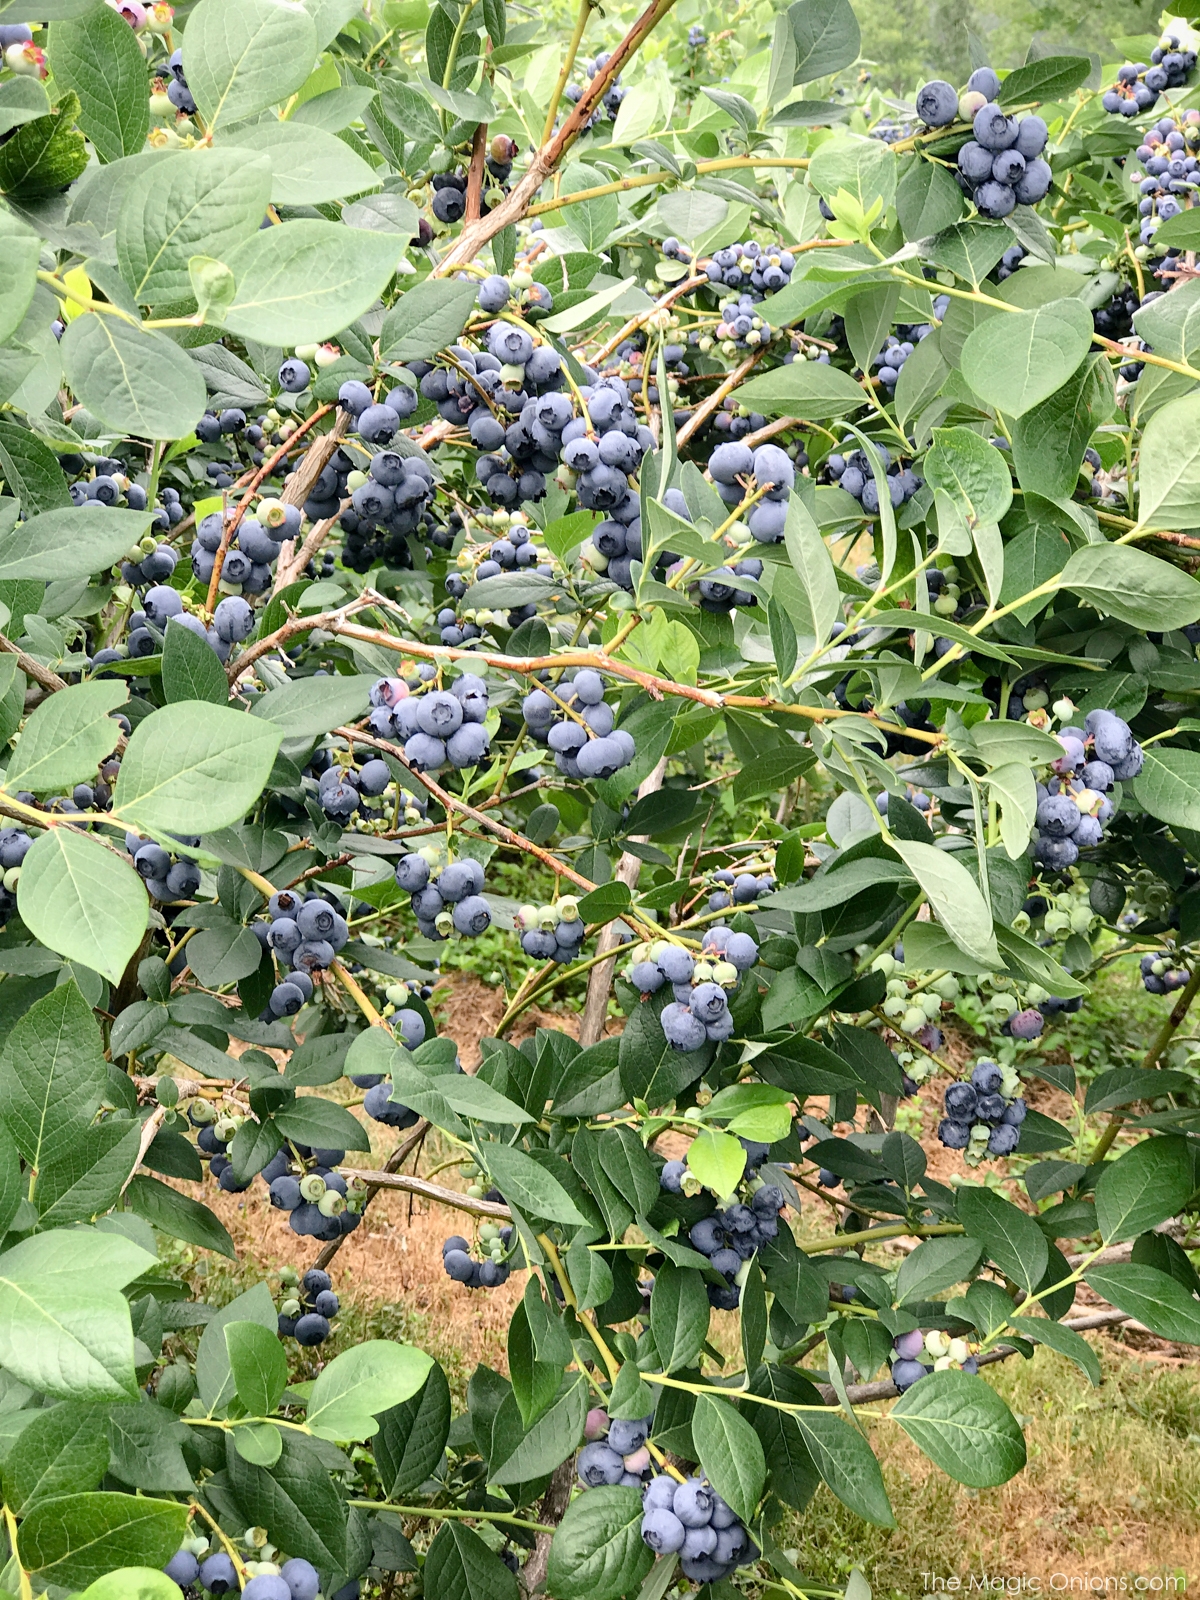 Picking Blueberries at Monadnock Berries, New Hampshire 4